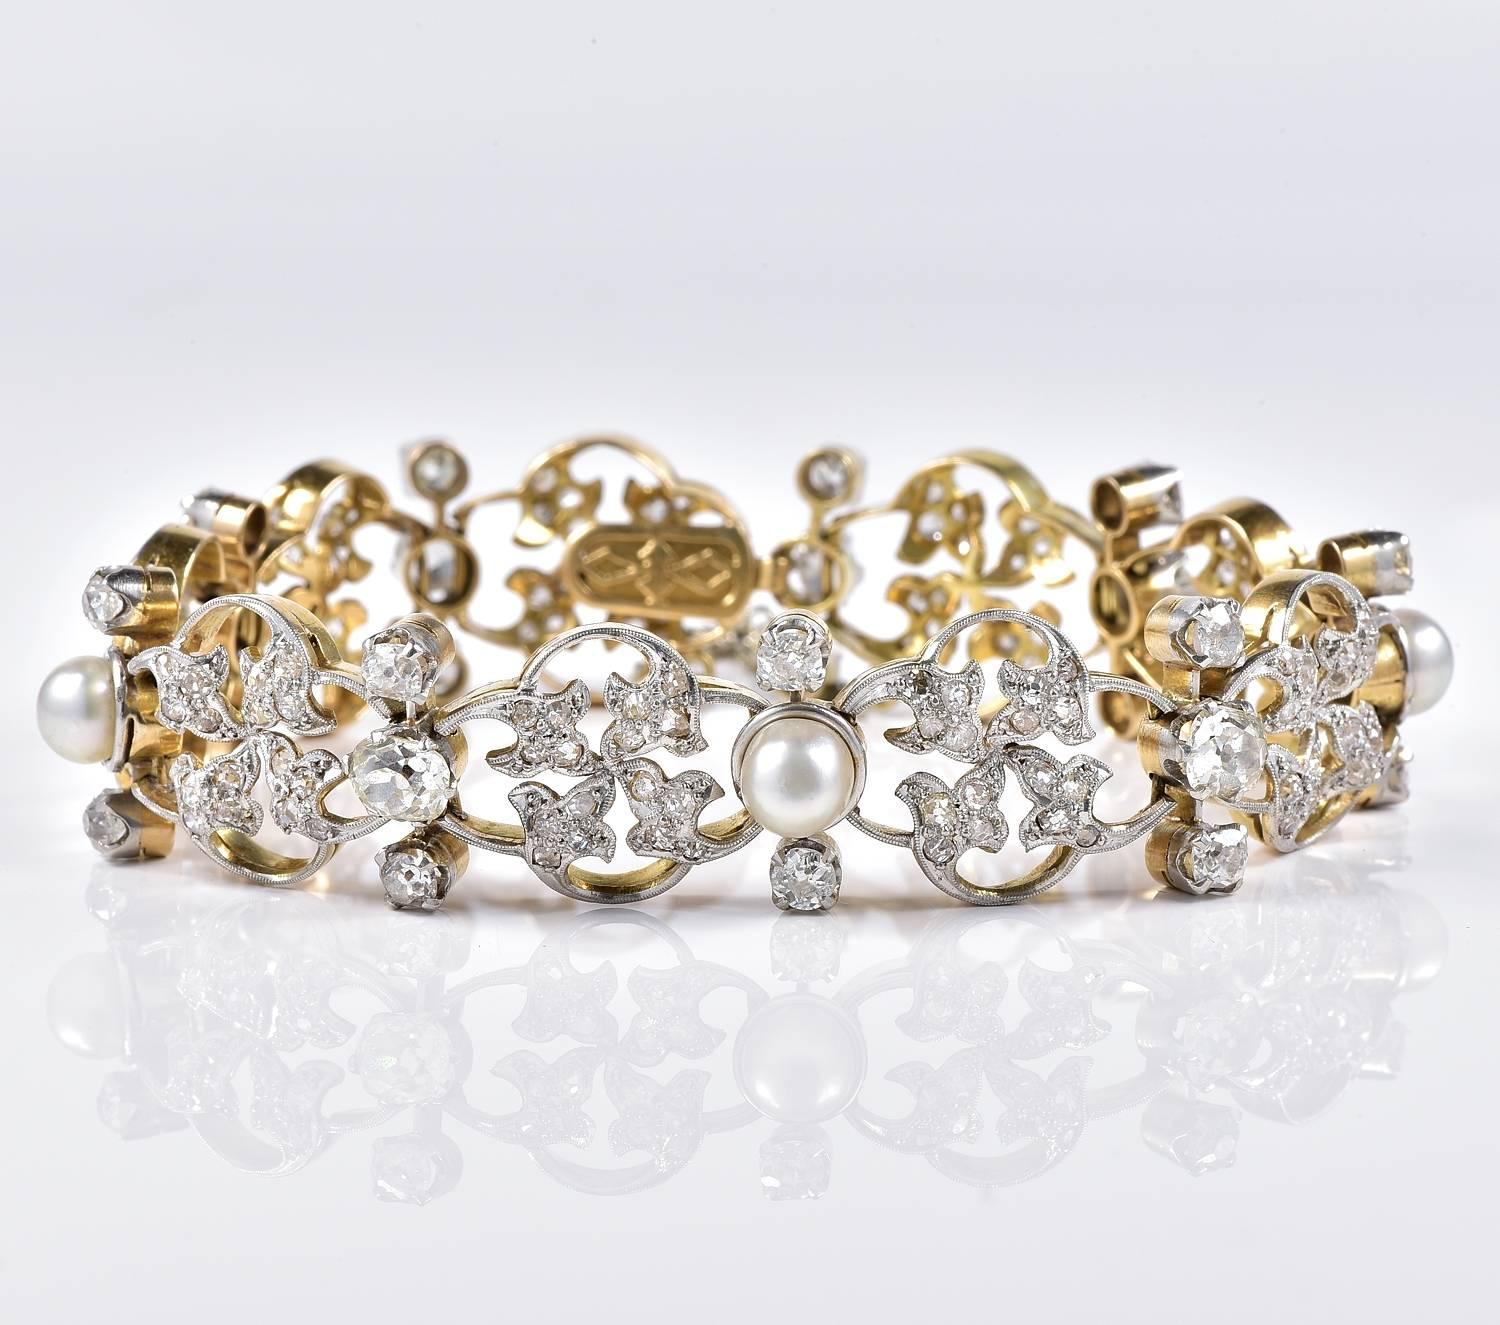 Rare Art Nouveau Bracelet of distinctive floral design, 1895 ca. 
Crafted of 18 KT gold topped by Platinum
Set with 9.50 CT of old mine cut Diamonds and natural sea pearls from the Persian Gulf.
Excellent condition

Art Nouveau design distinguish